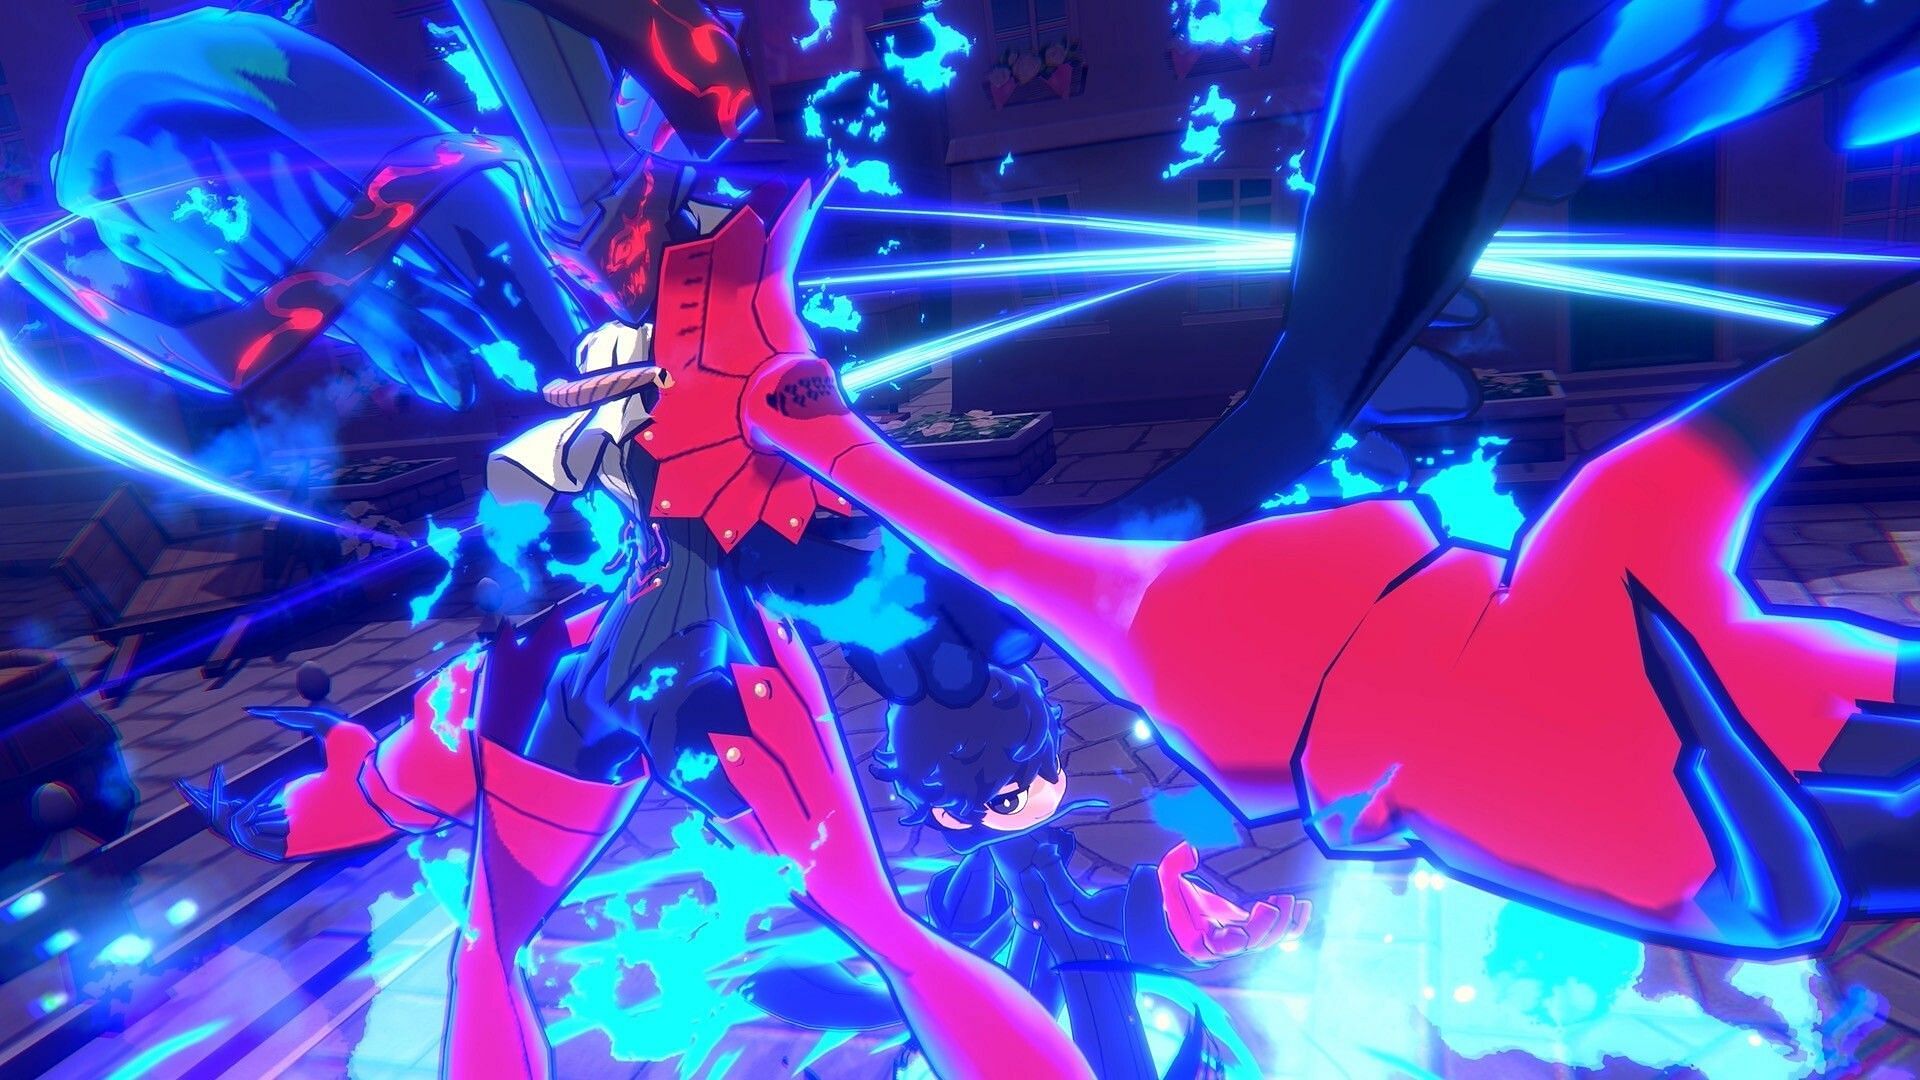 Persona 5 Tactica Review: This Metaverse is a blockbuster hit!